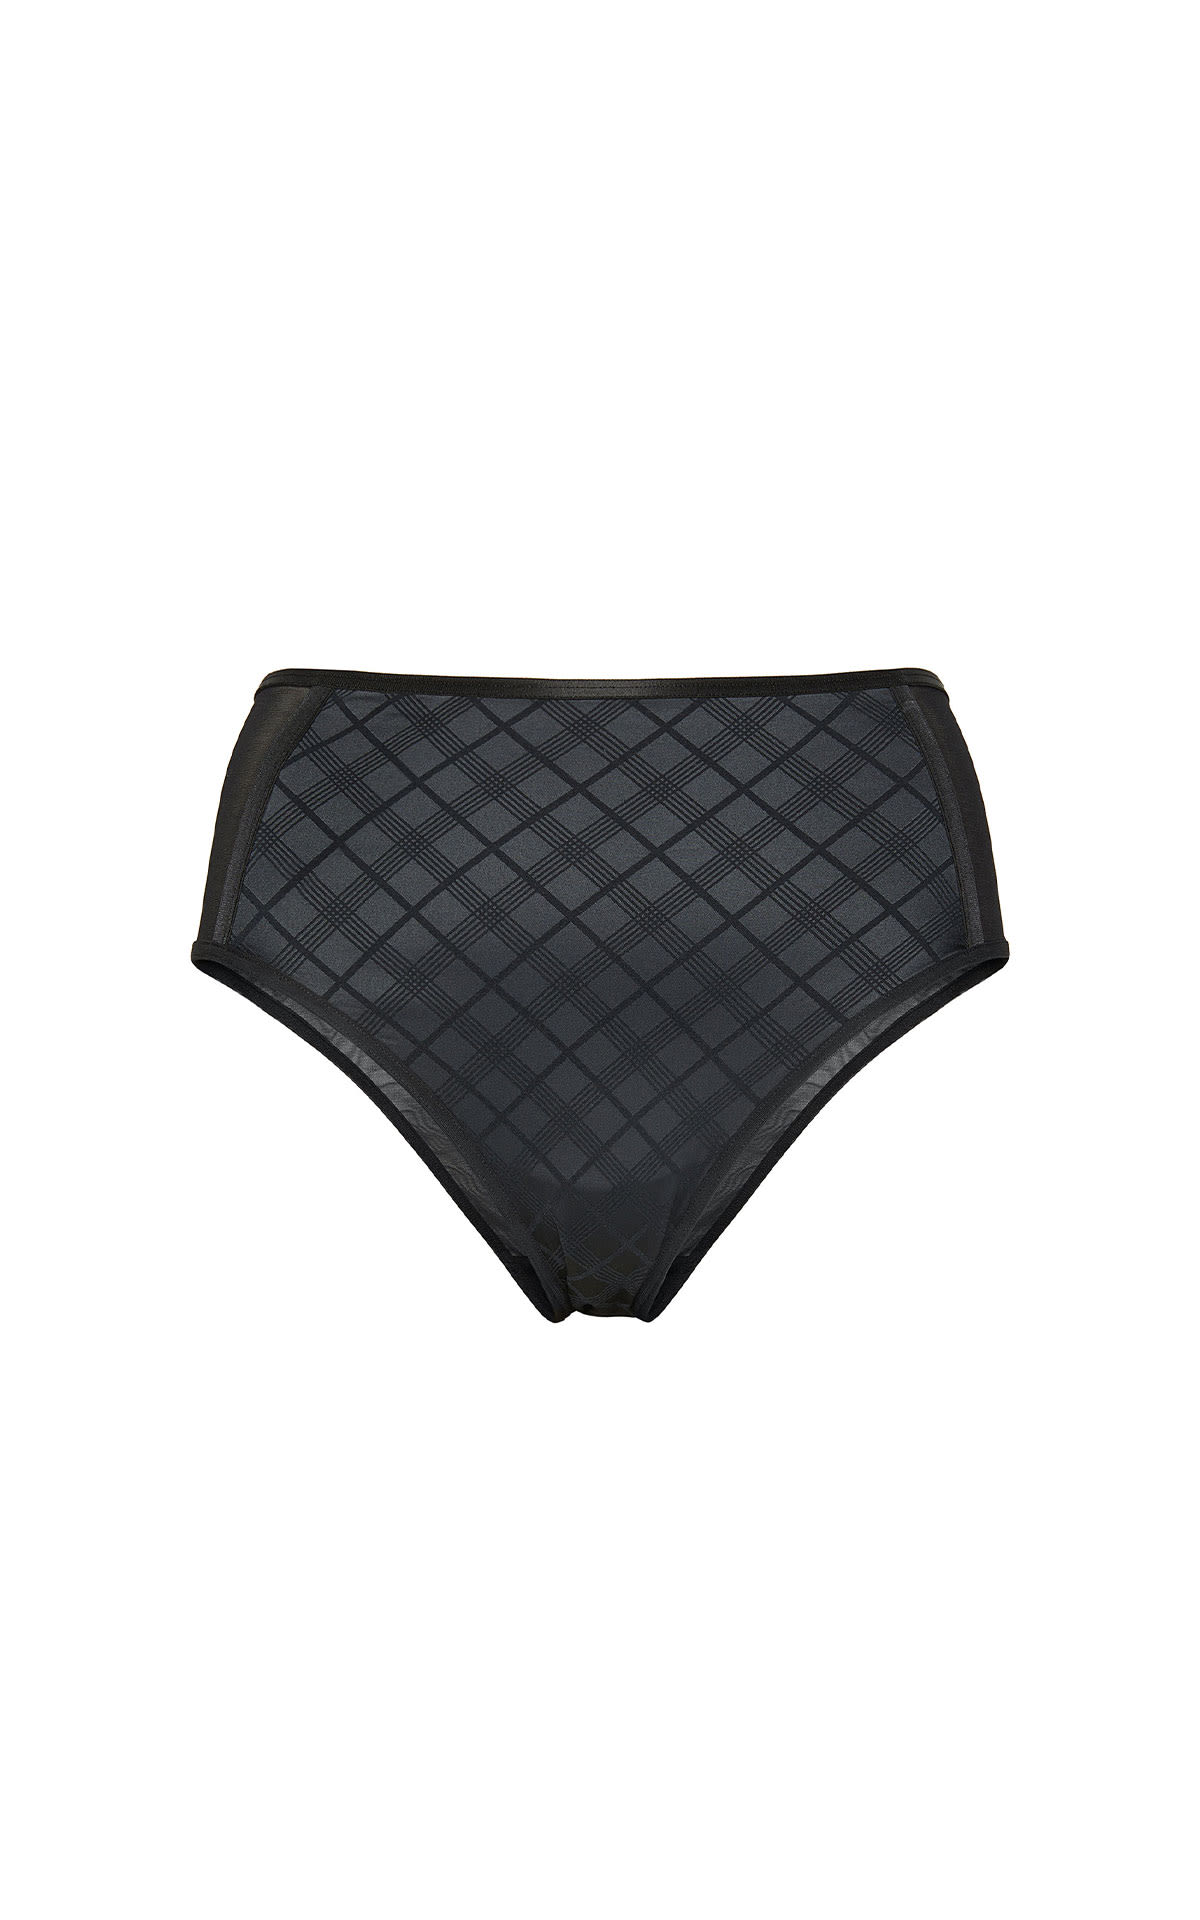 Wolford Gilda tulle panty high waist from Bicester Village